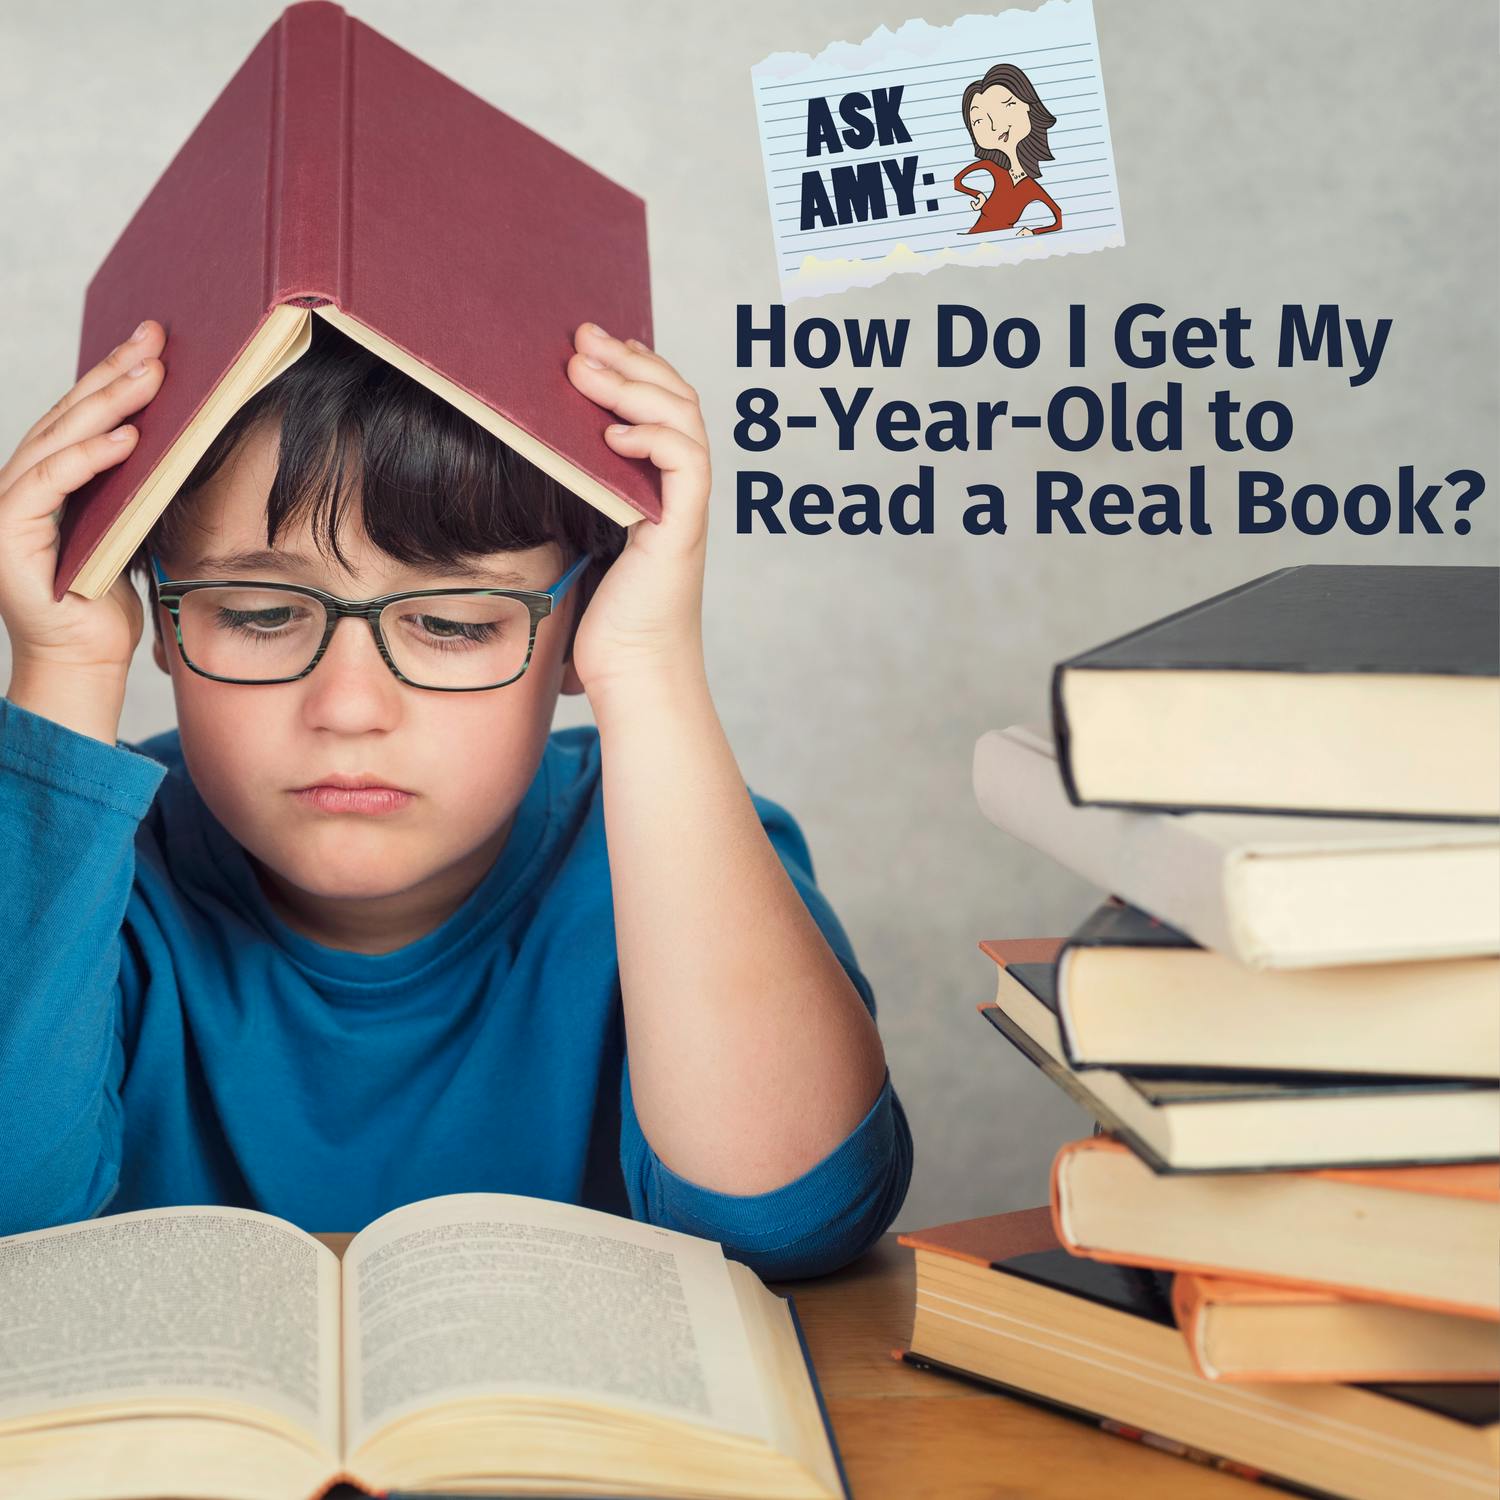 Ask Amy: How Do I Get My 8-Year-Old to Read a Real Book?